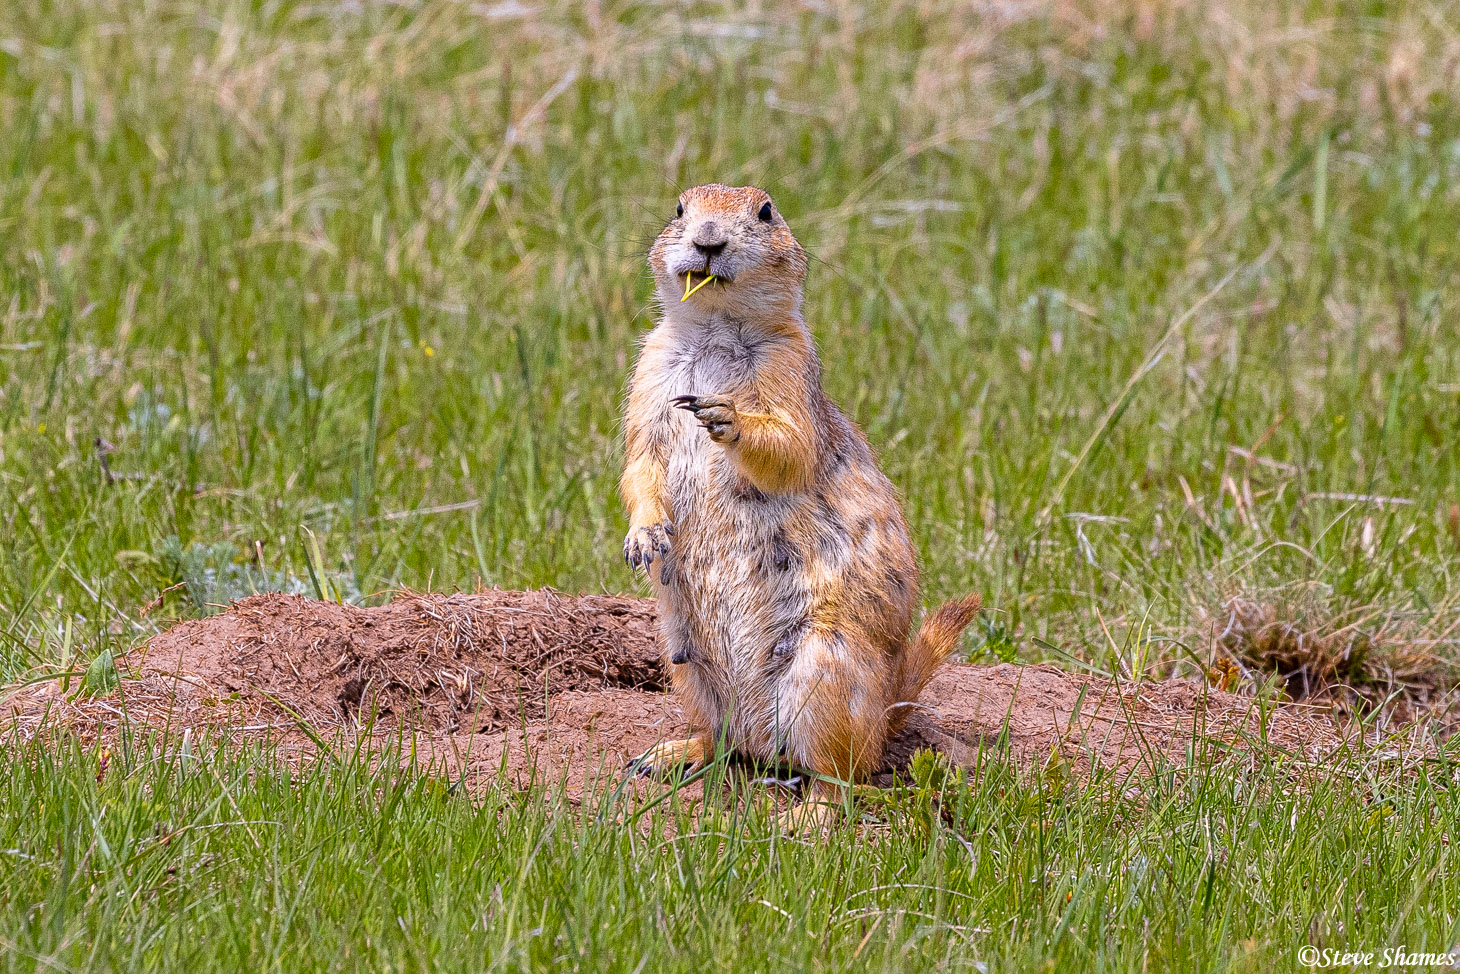 Along a hiking trail at Wind Cave National Park is a good sized prairie dog town. Here is one of the citizens.